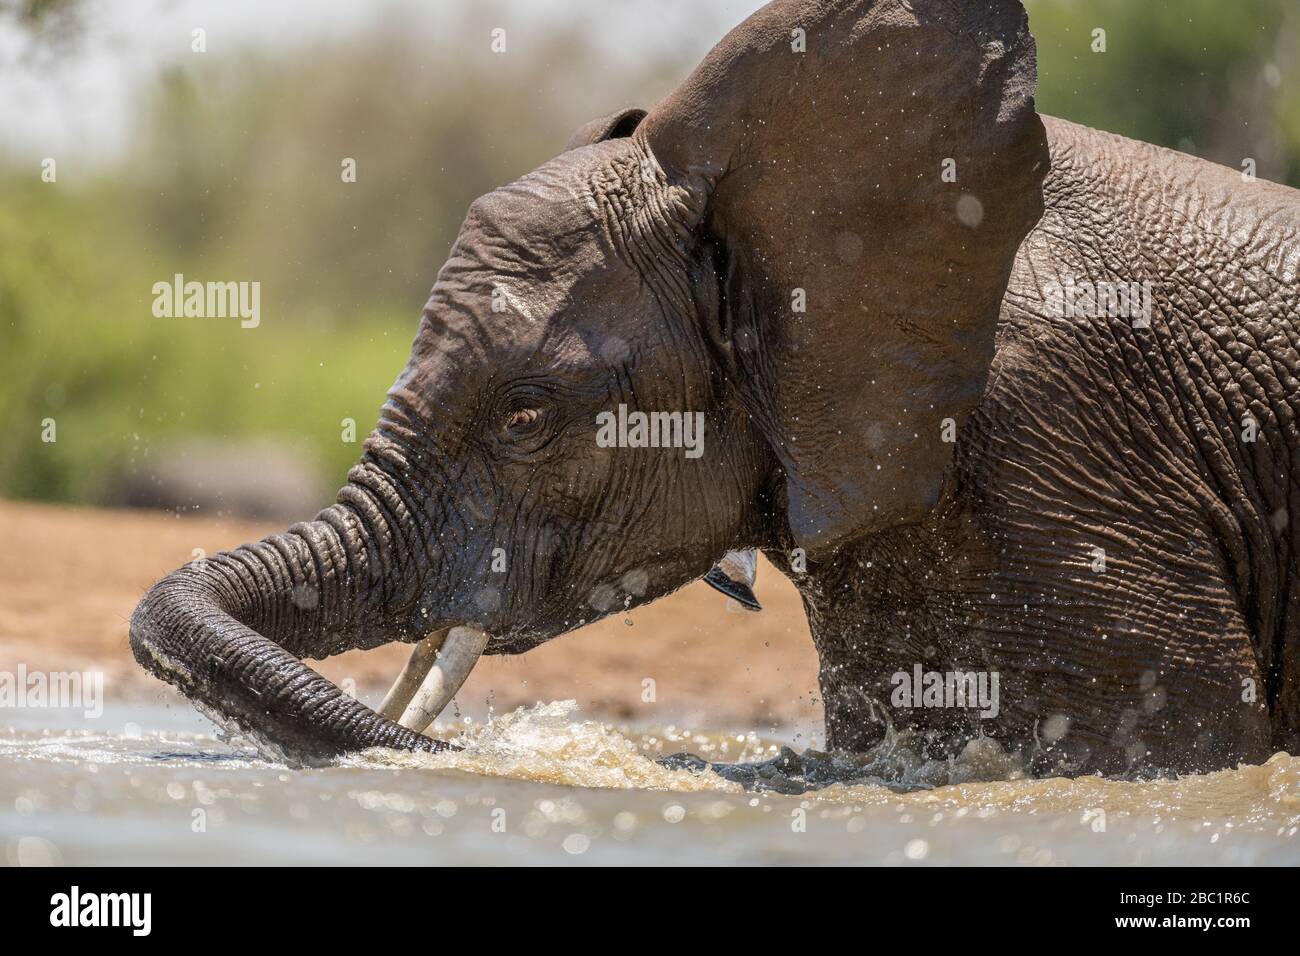 A close up action portrait of a swimming elephant, splashing, playing and drinking in a waterhole at the Madikwe Game Reserve, South Africa. Stock Photo